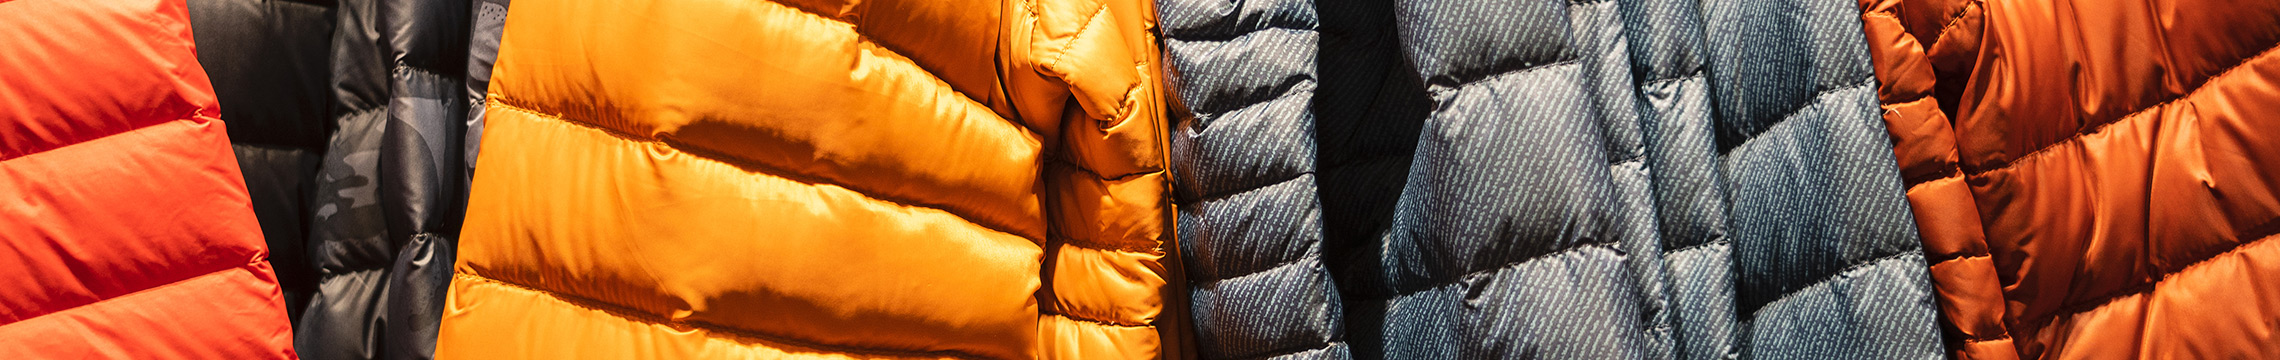 Winter puffer coats hung in a closet in a variety of colors